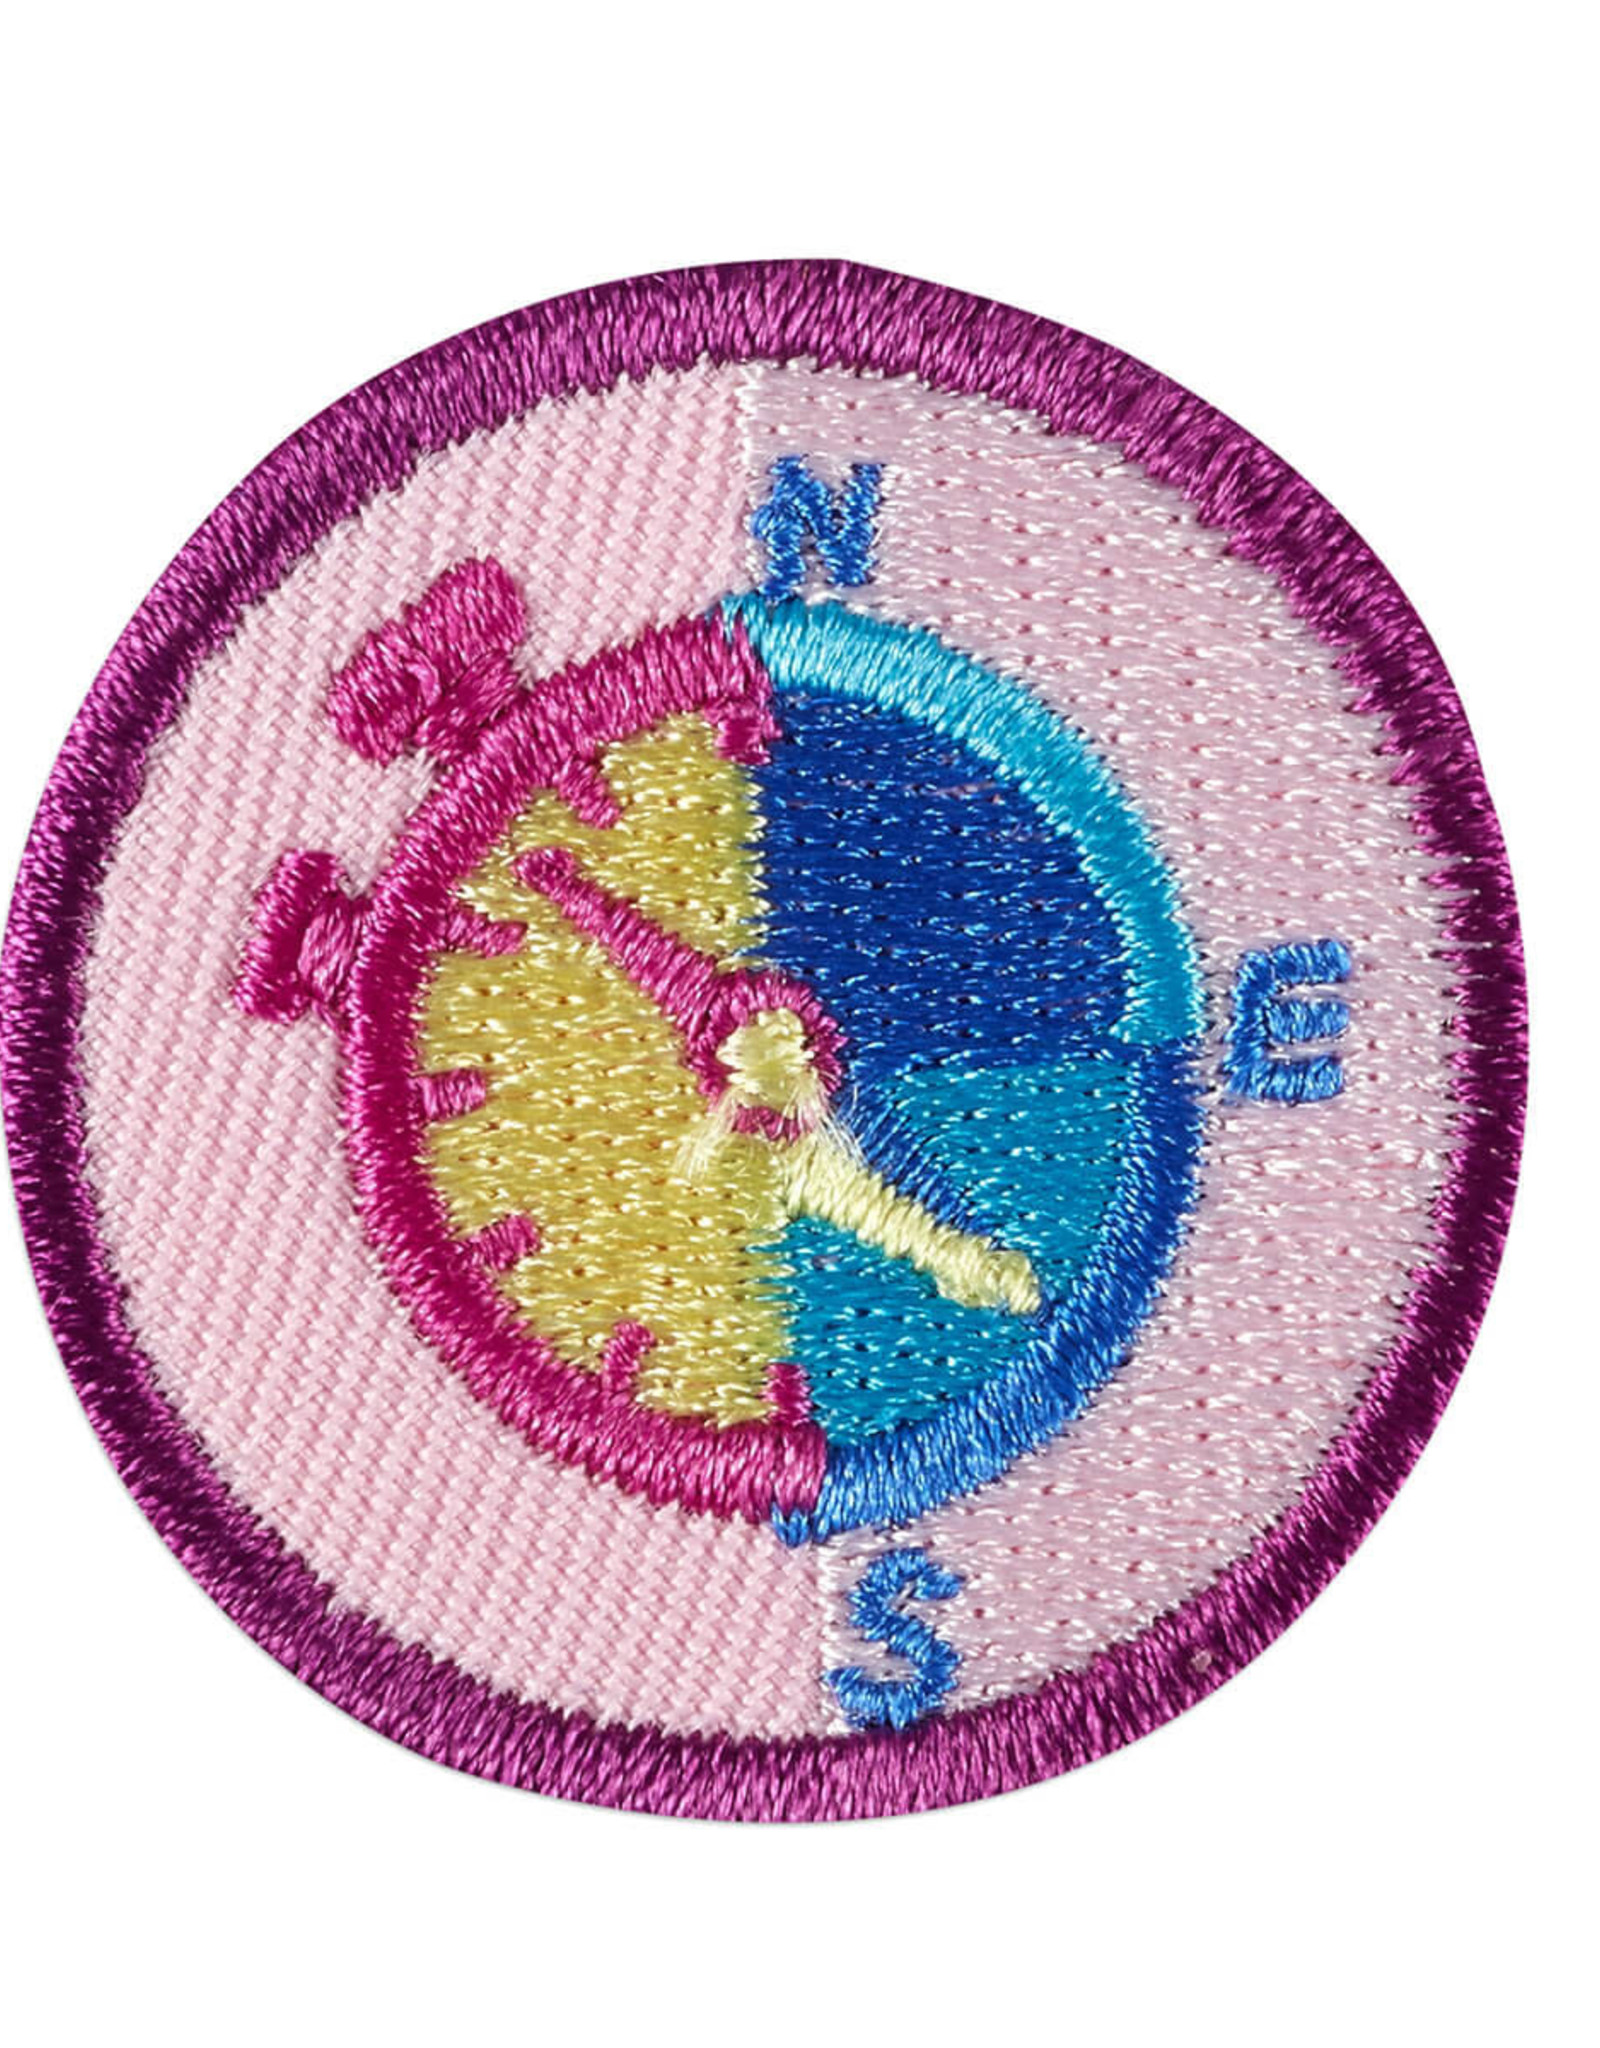 GIRL SCOUTS OF THE USA Junior Trail Adventure Badge